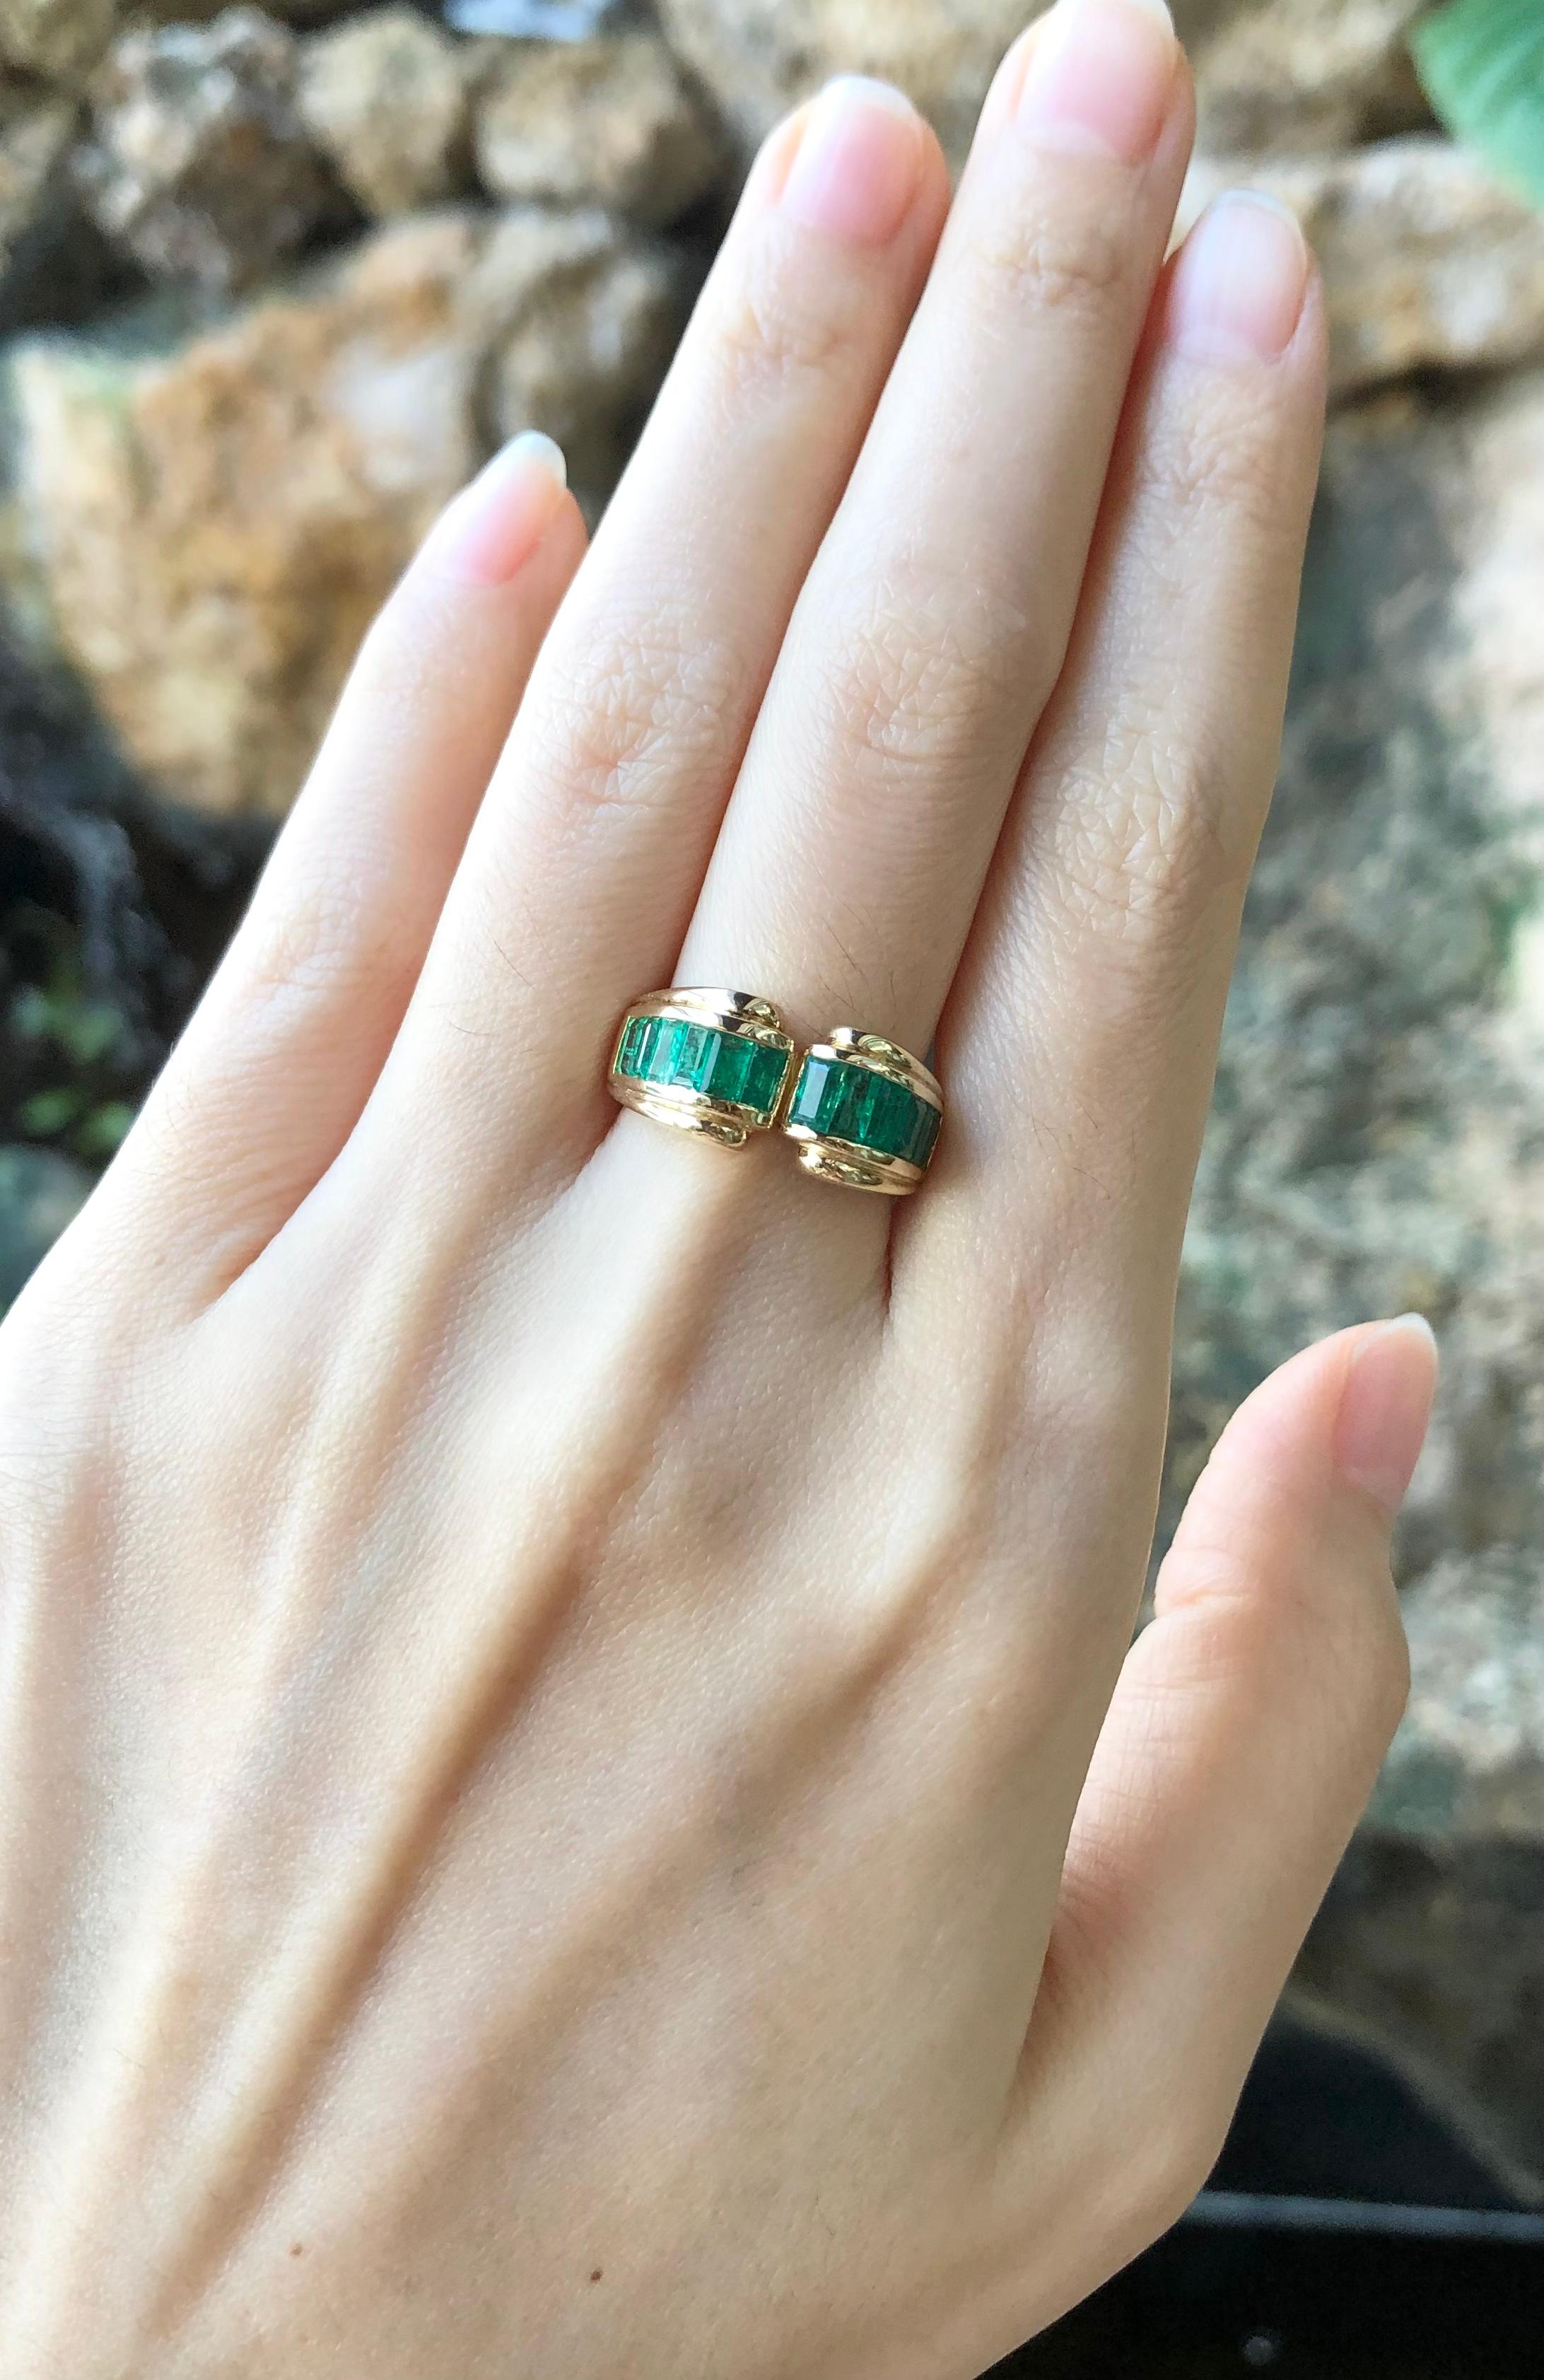 Emerald 1.60 carats Ring set in 18 Karat Gold Settings

Width:  2.0 cm 
Length: 0.8 cm
Ring Size: 53
Total Weight: 6.4 grams


